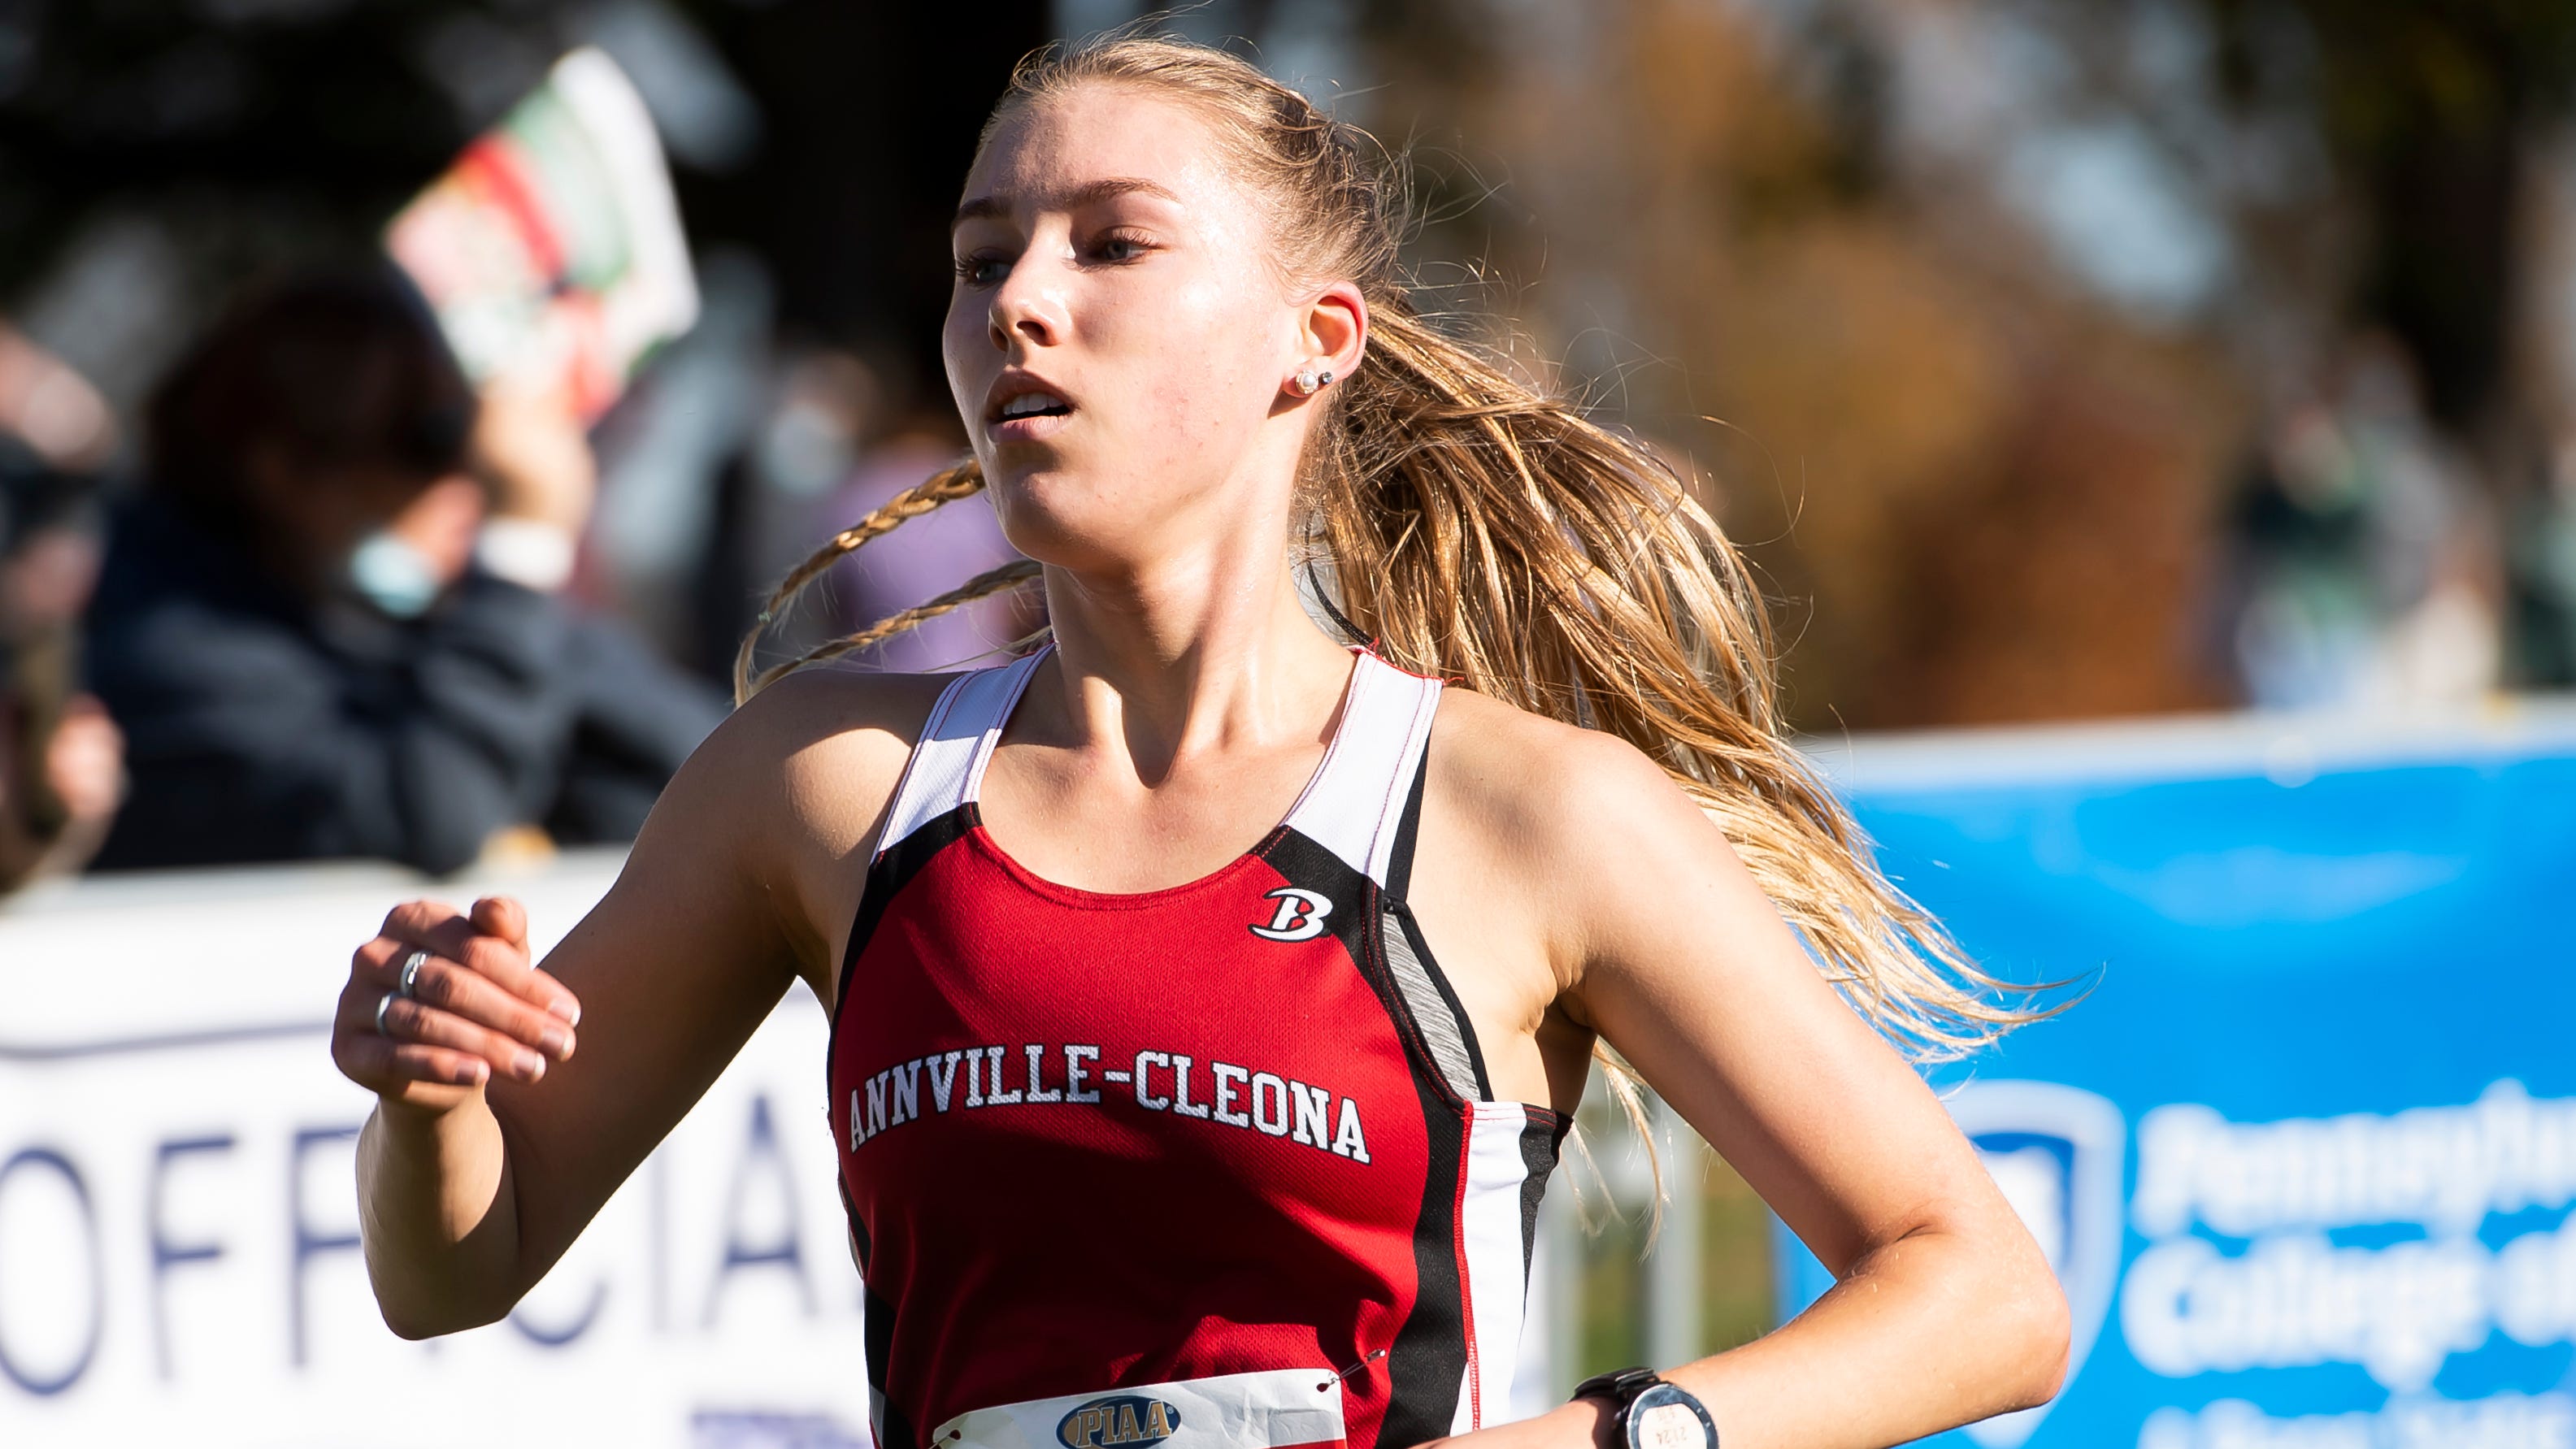 PIAA Cross Country Championship Results in Hershey, PA